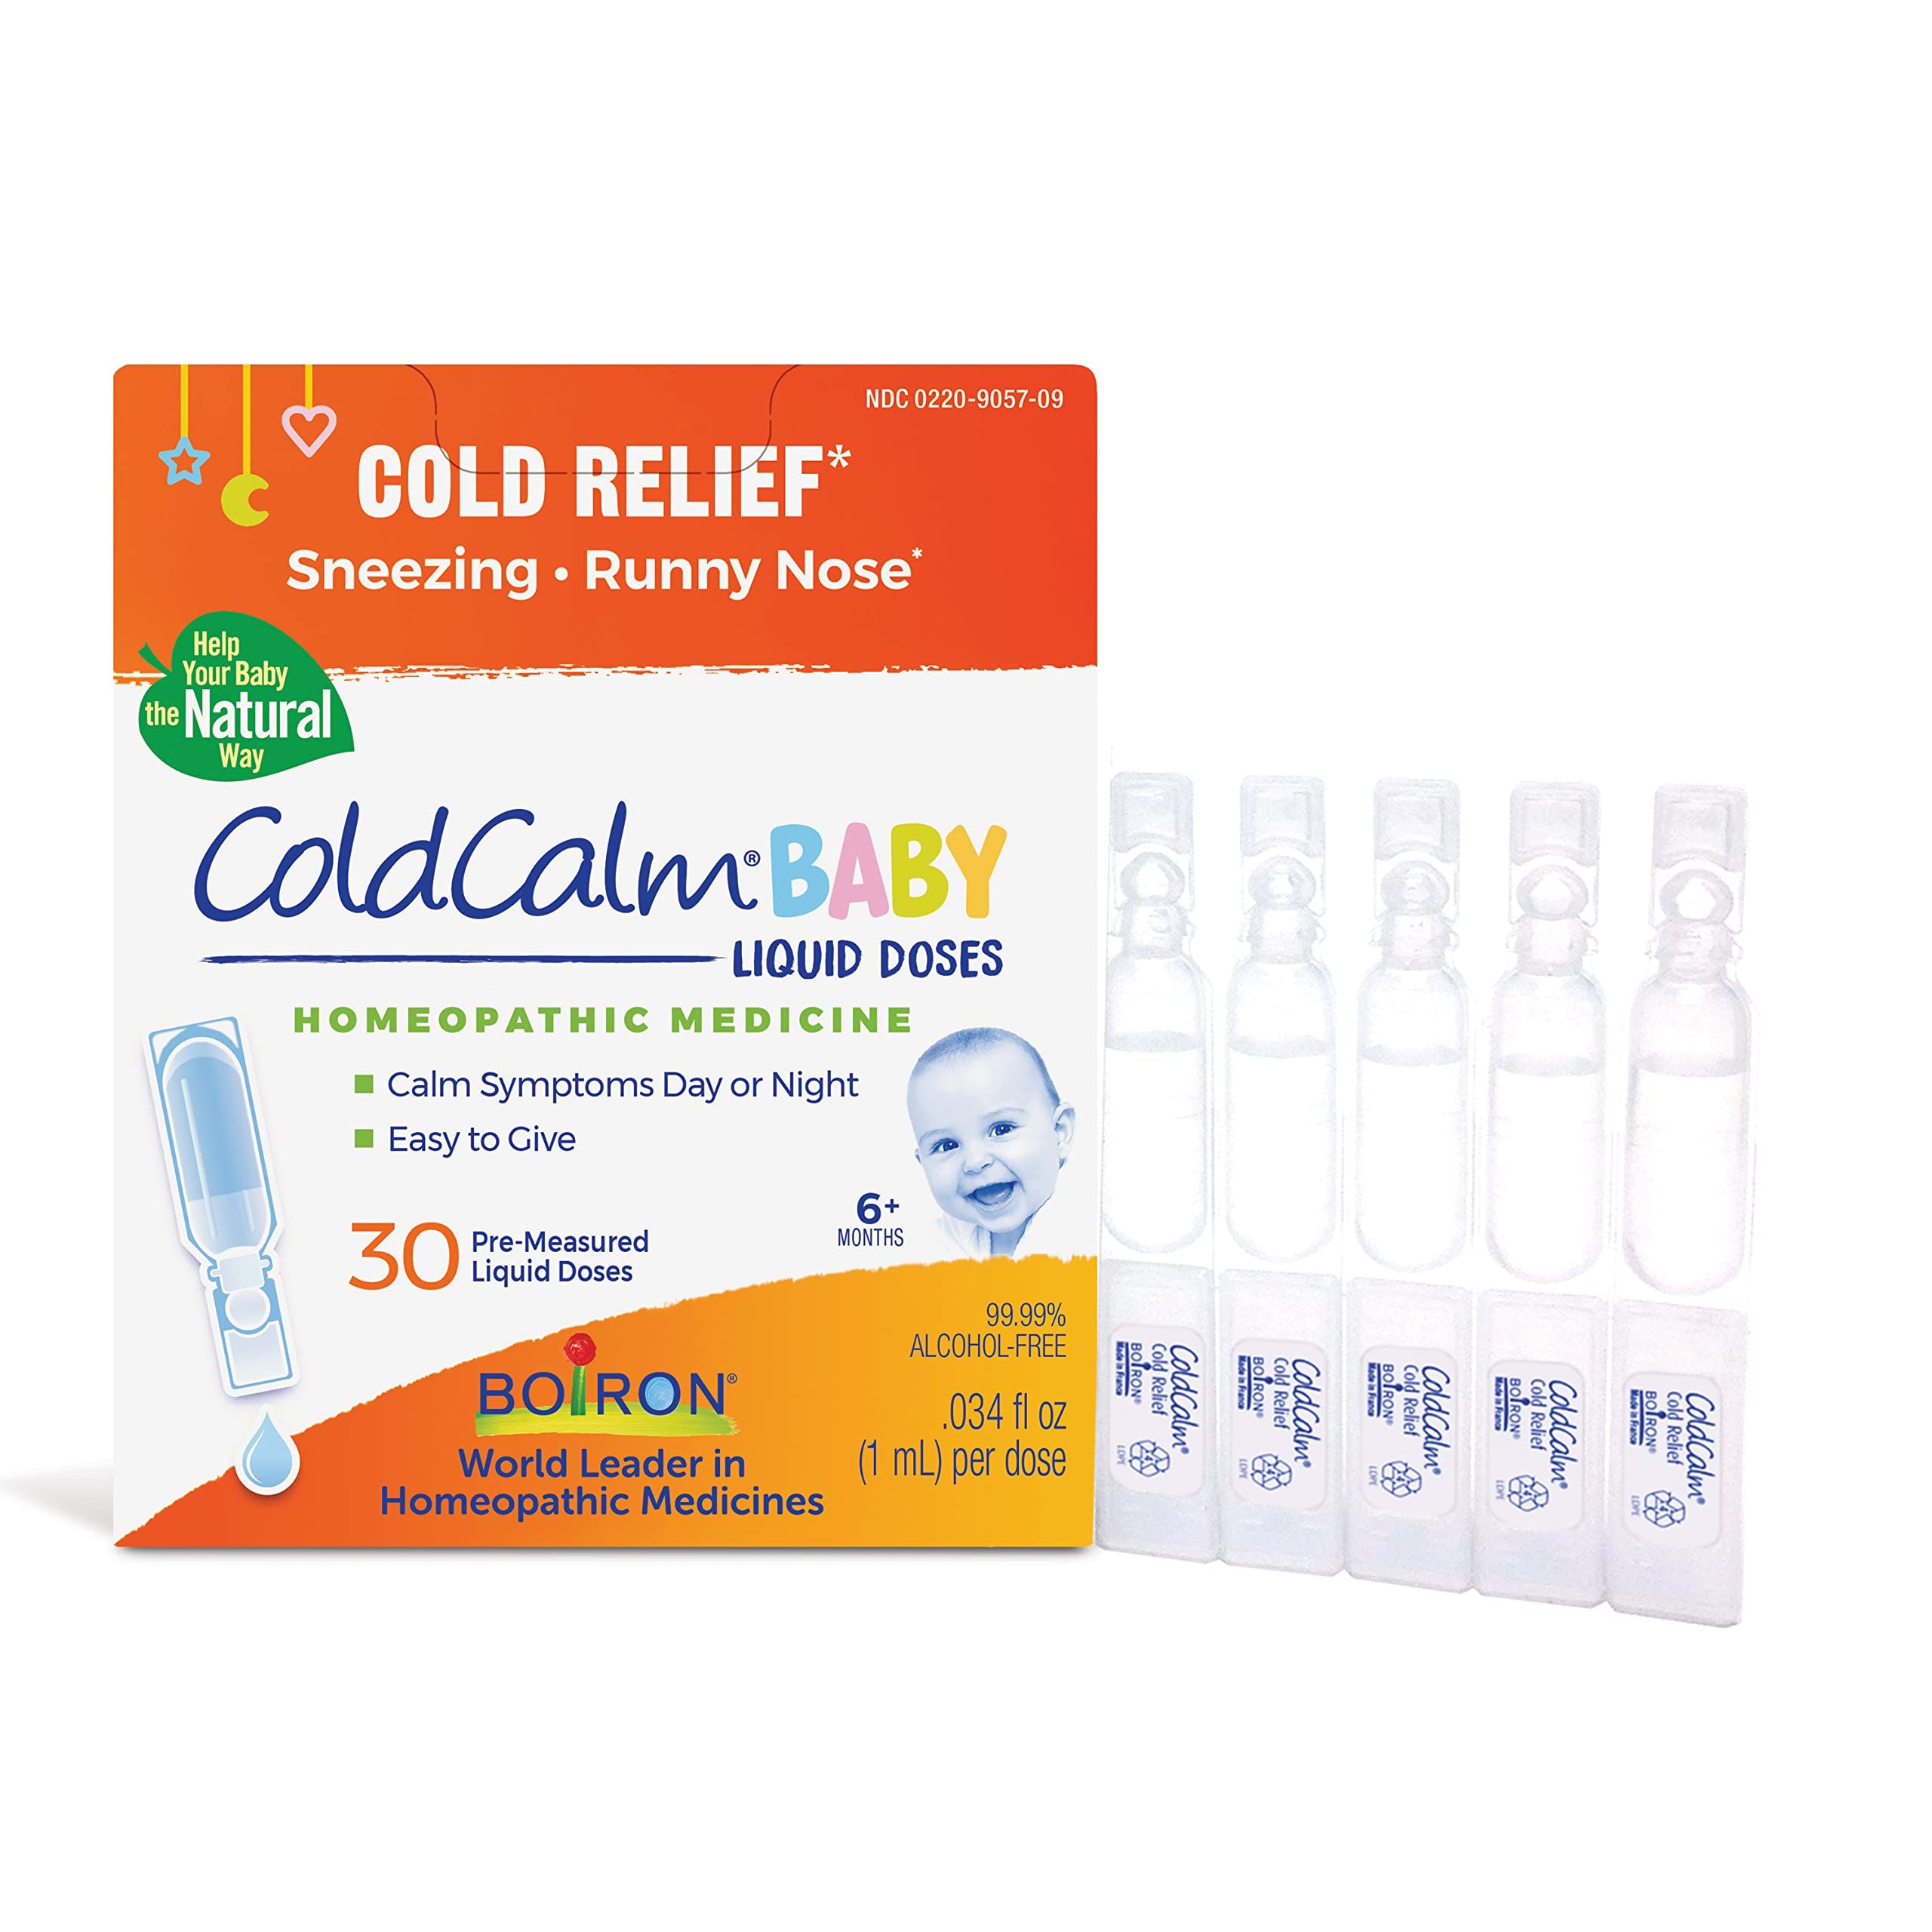 Boiron ColdCalm Baby Single-Use Drops for Relief from Cold Symptoms of Sneezing, Runny Nose, and ... | Amazon (US)